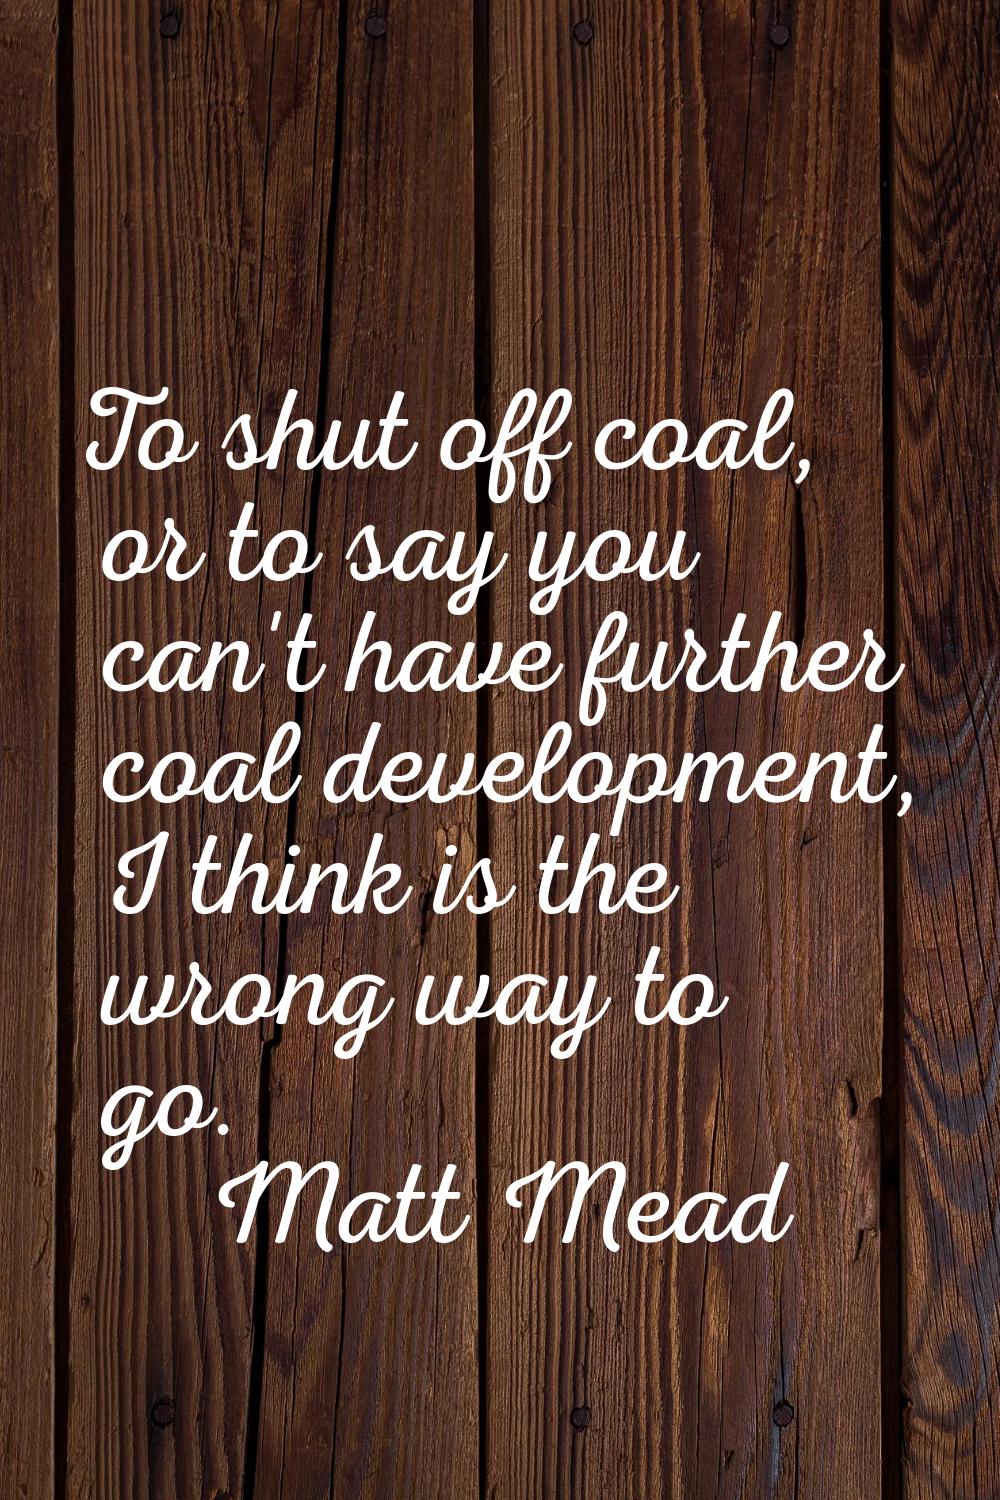 To shut off coal, or to say you can't have further coal development, I think is the wrong way to go